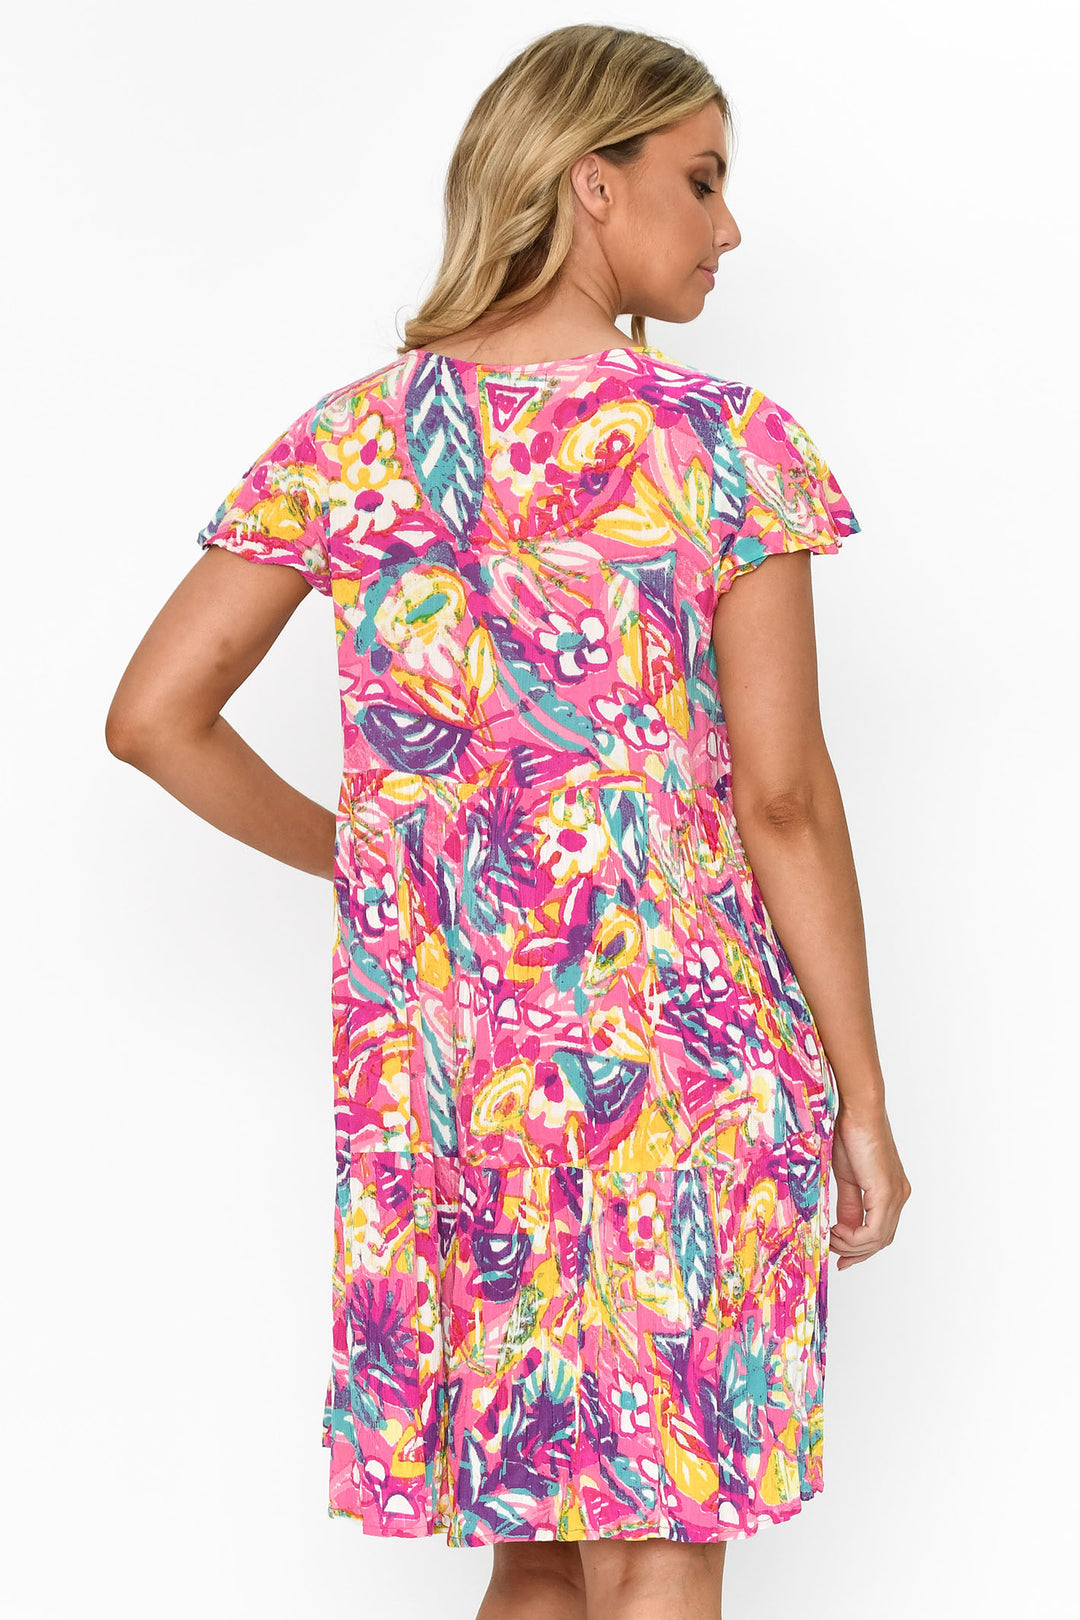 One Summer DW71F Pink Kimberley Abstract Print Dress - Experience Boutique